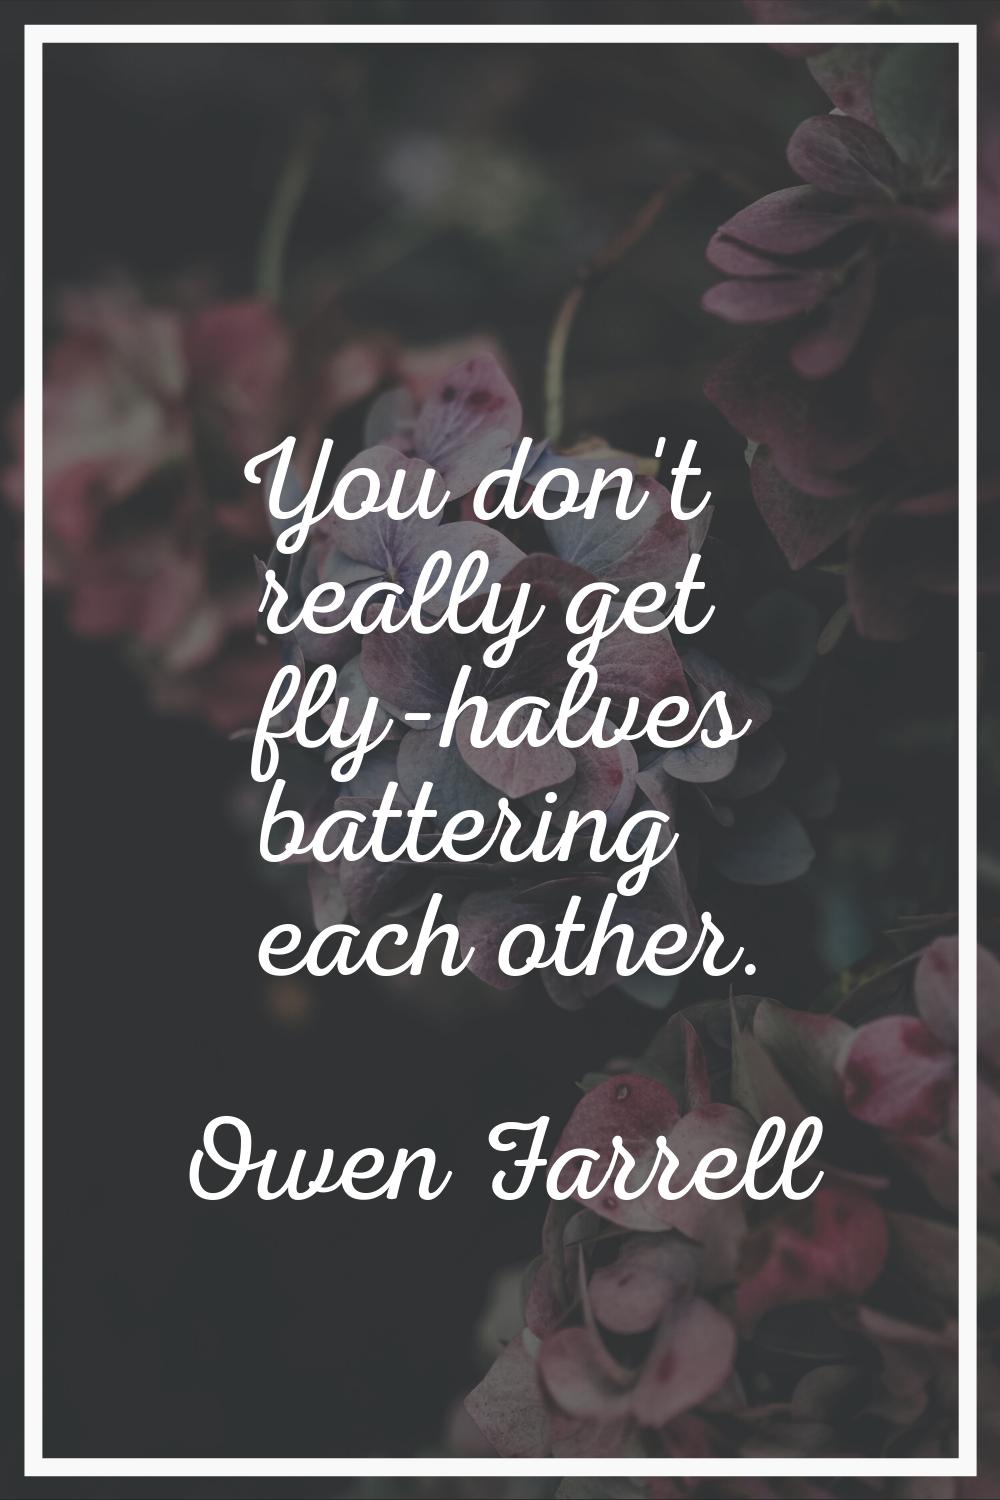 You don't really get fly-halves battering each other.